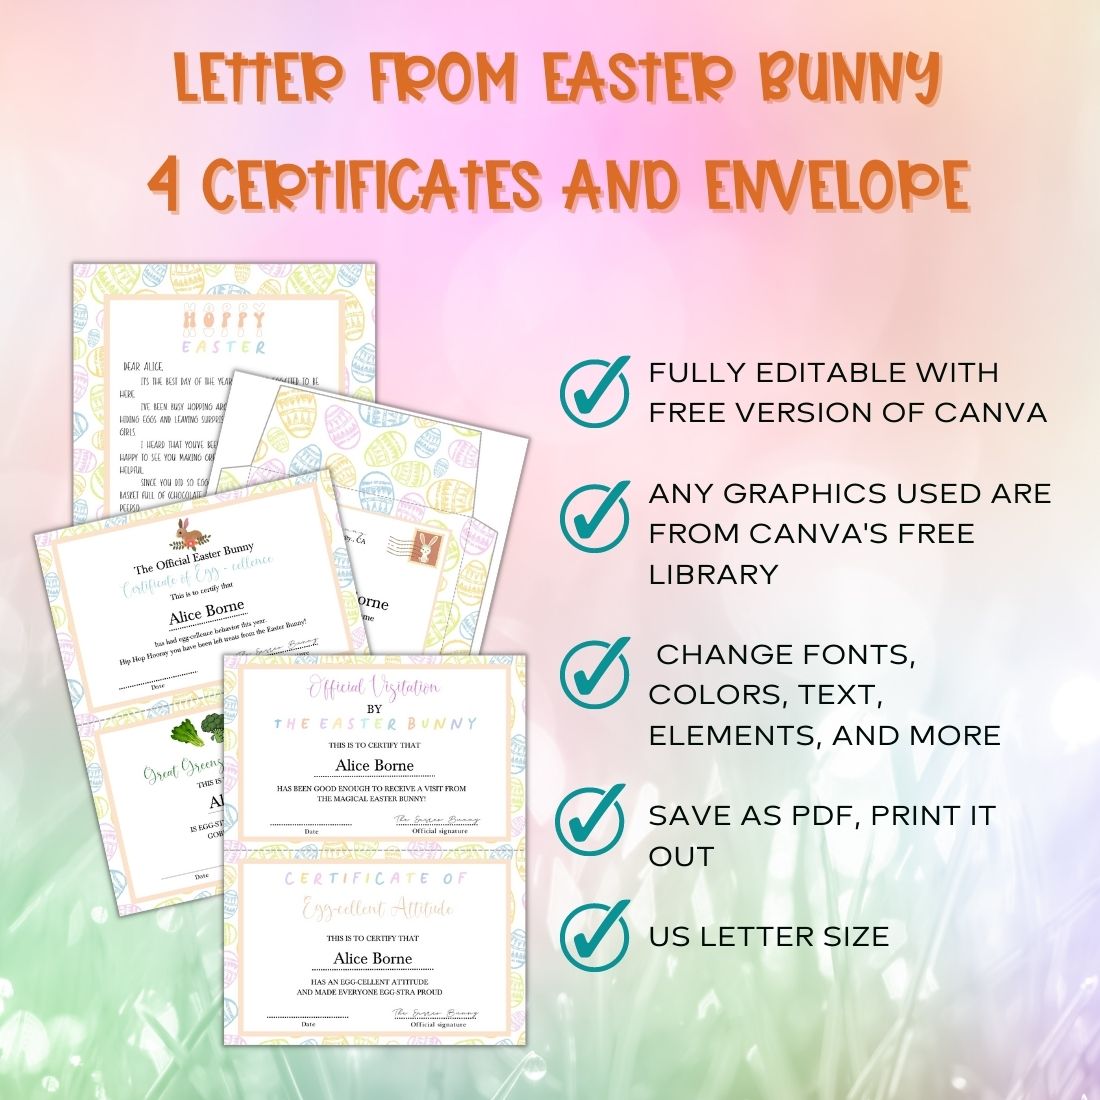 Set of four letter from easter bunny certificates and envelopes.